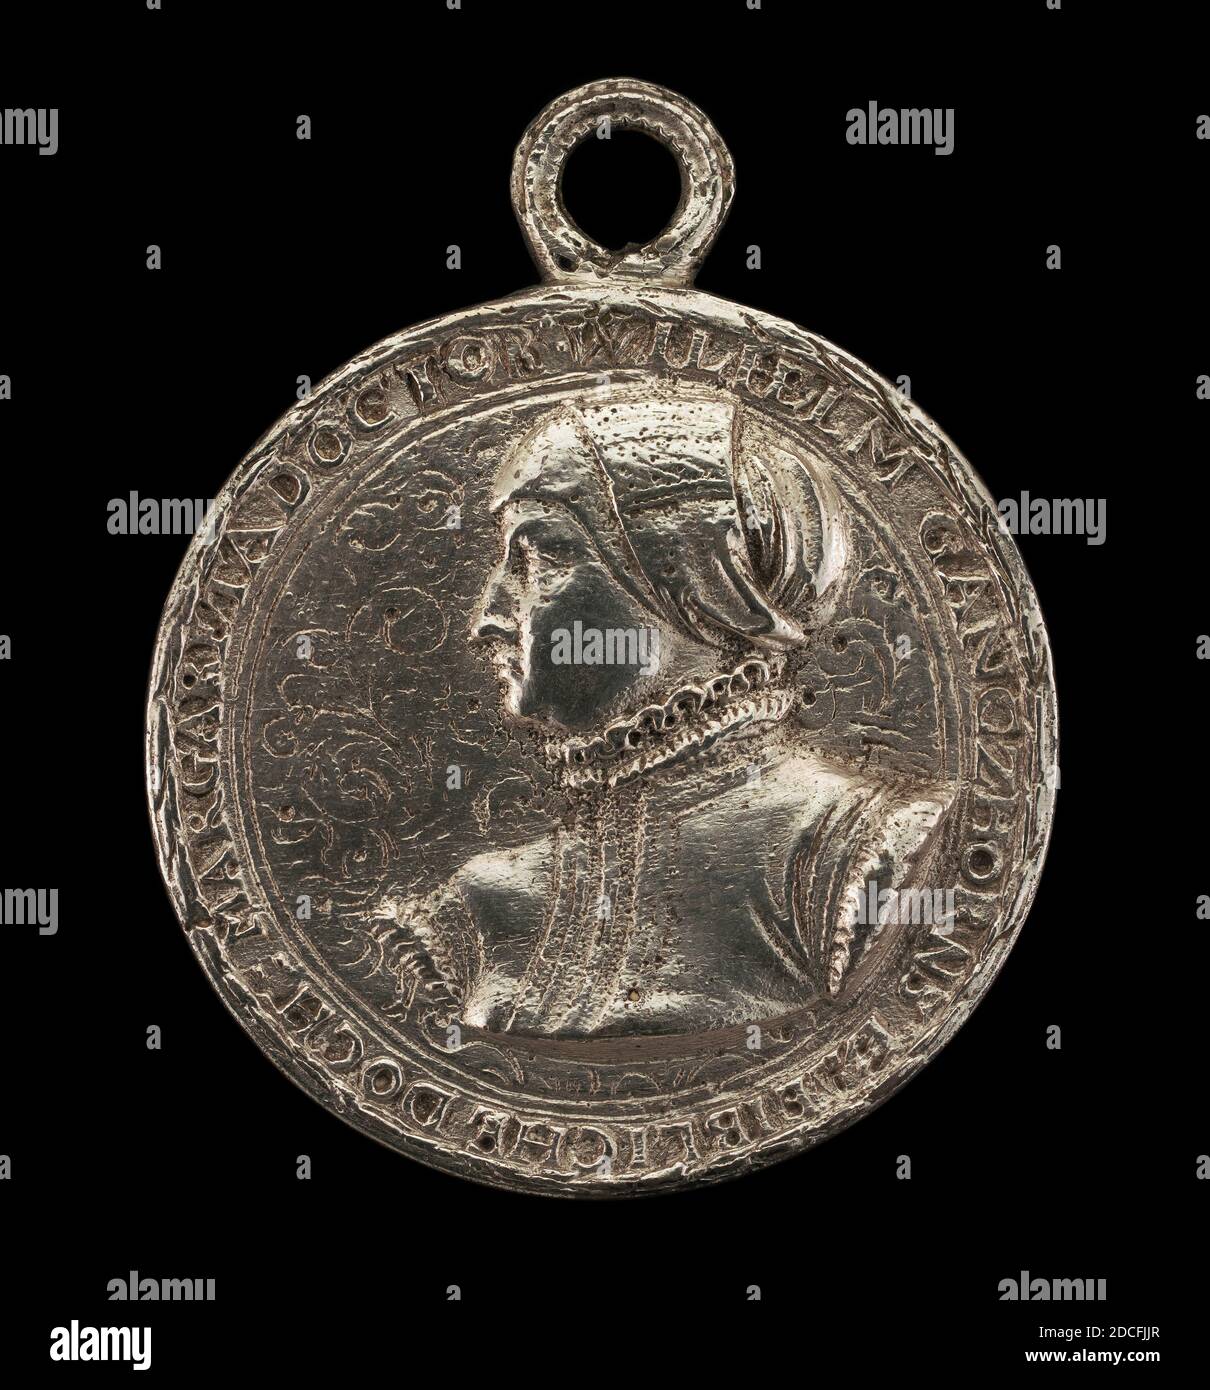 Joachim Deschler, (artist), German, c. 1500 - 1571, Margarethe Ganzhorn Balbus, Wife of Johann Balbus, 1565, silver/With ring, overall (height with suspension loop): 4.75 cm (1 7/8 in.), overall (diameter without loop): 3.94 cm (1 9/16 in.), gross weight: 31.15 gr (0.069 lb.), axis: 12:00 Stock Photo